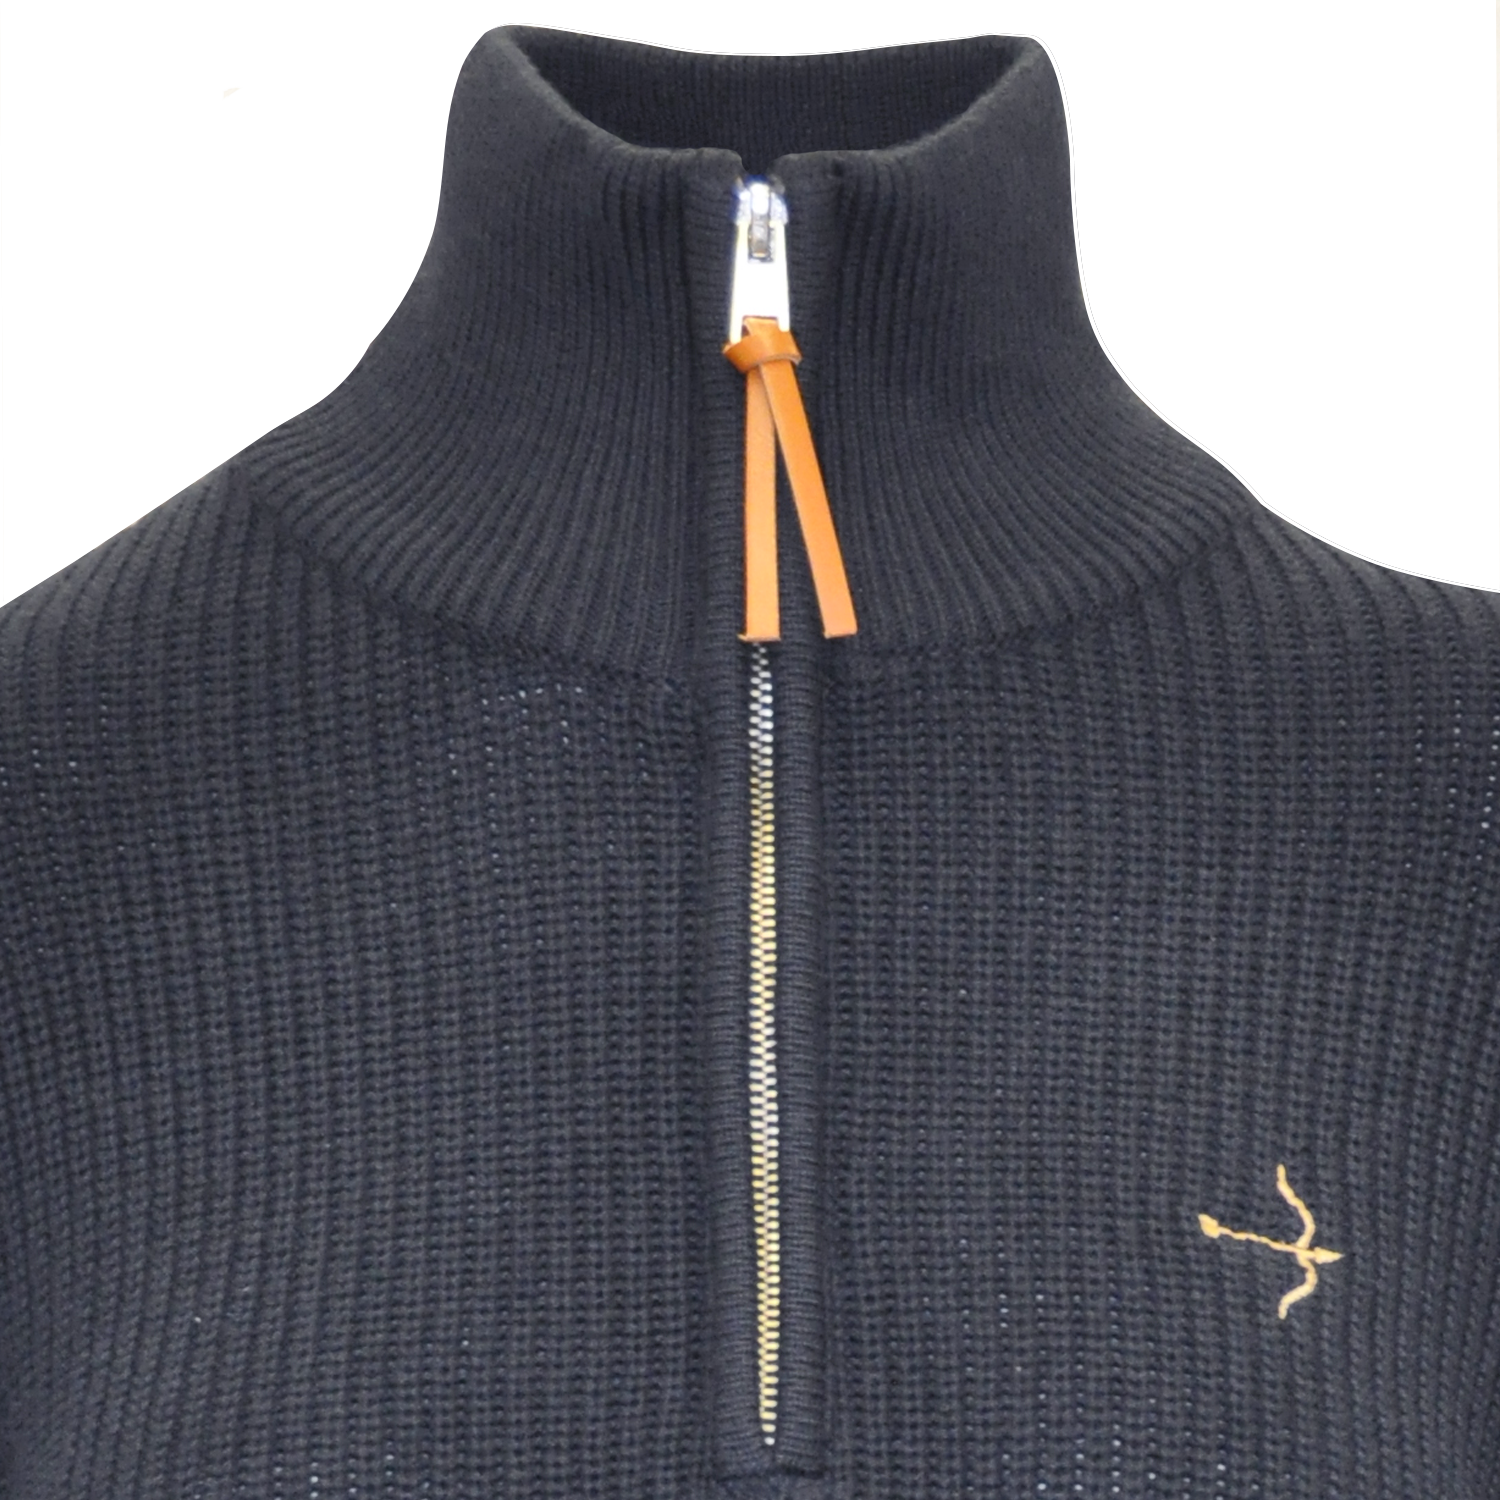 The Laguso Rolph Unisex jumper. In a Navy knitted and a quarter zip, this is a great transitional piece to take you through the seasons. Finished with a small Laguso logo. 